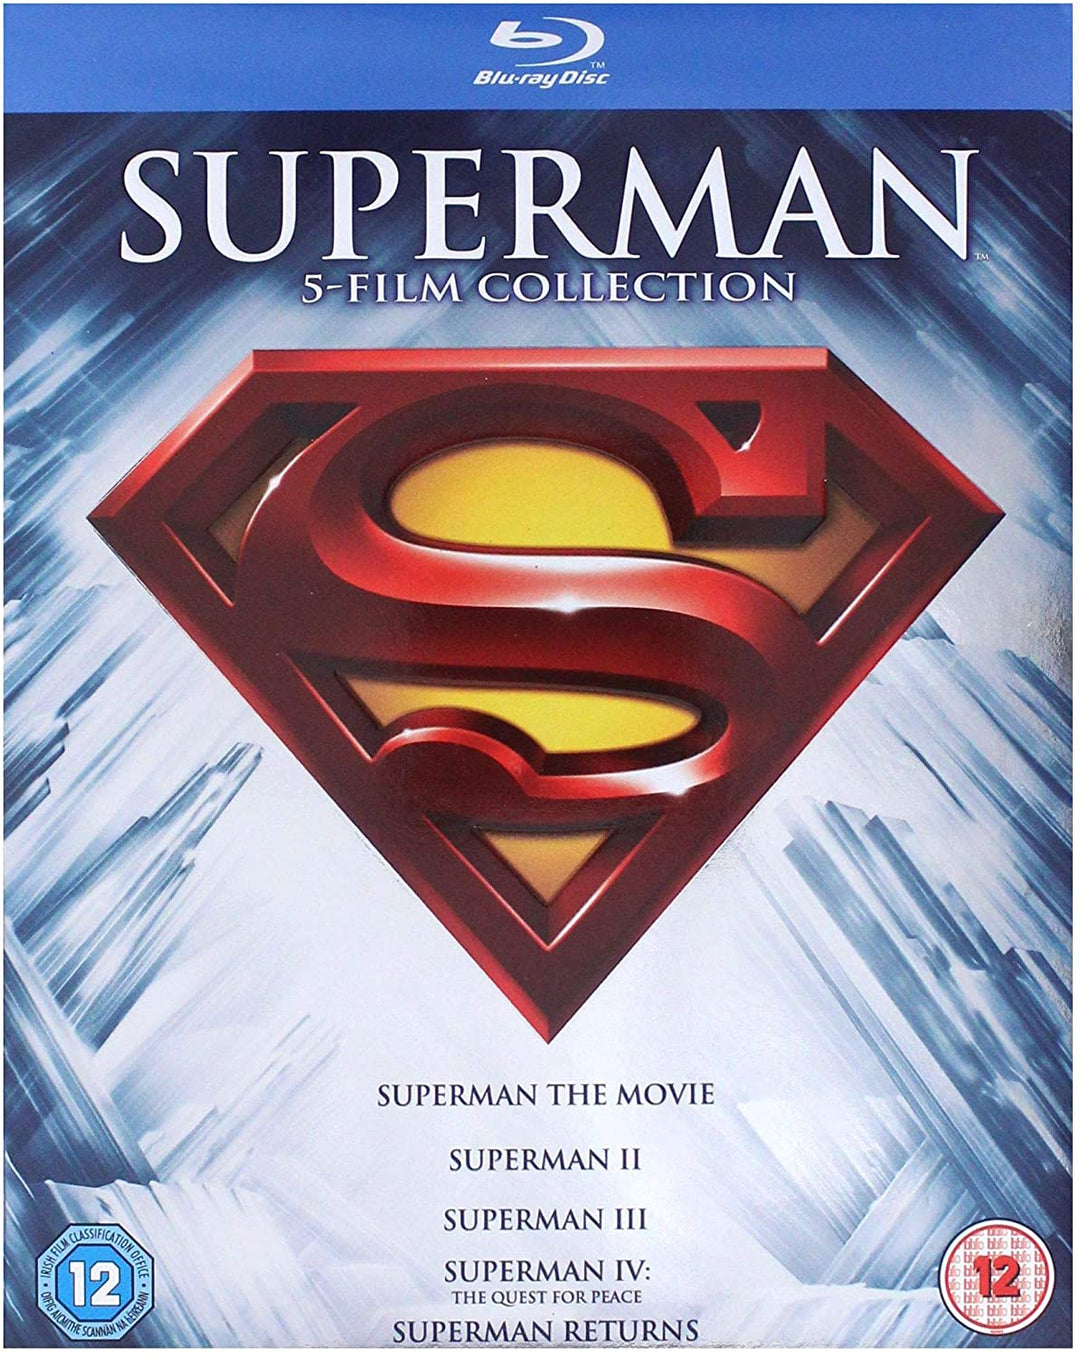 The Superman 5 Film Collection 1978-2006 [Blu-ray] [1978] [Region Free]